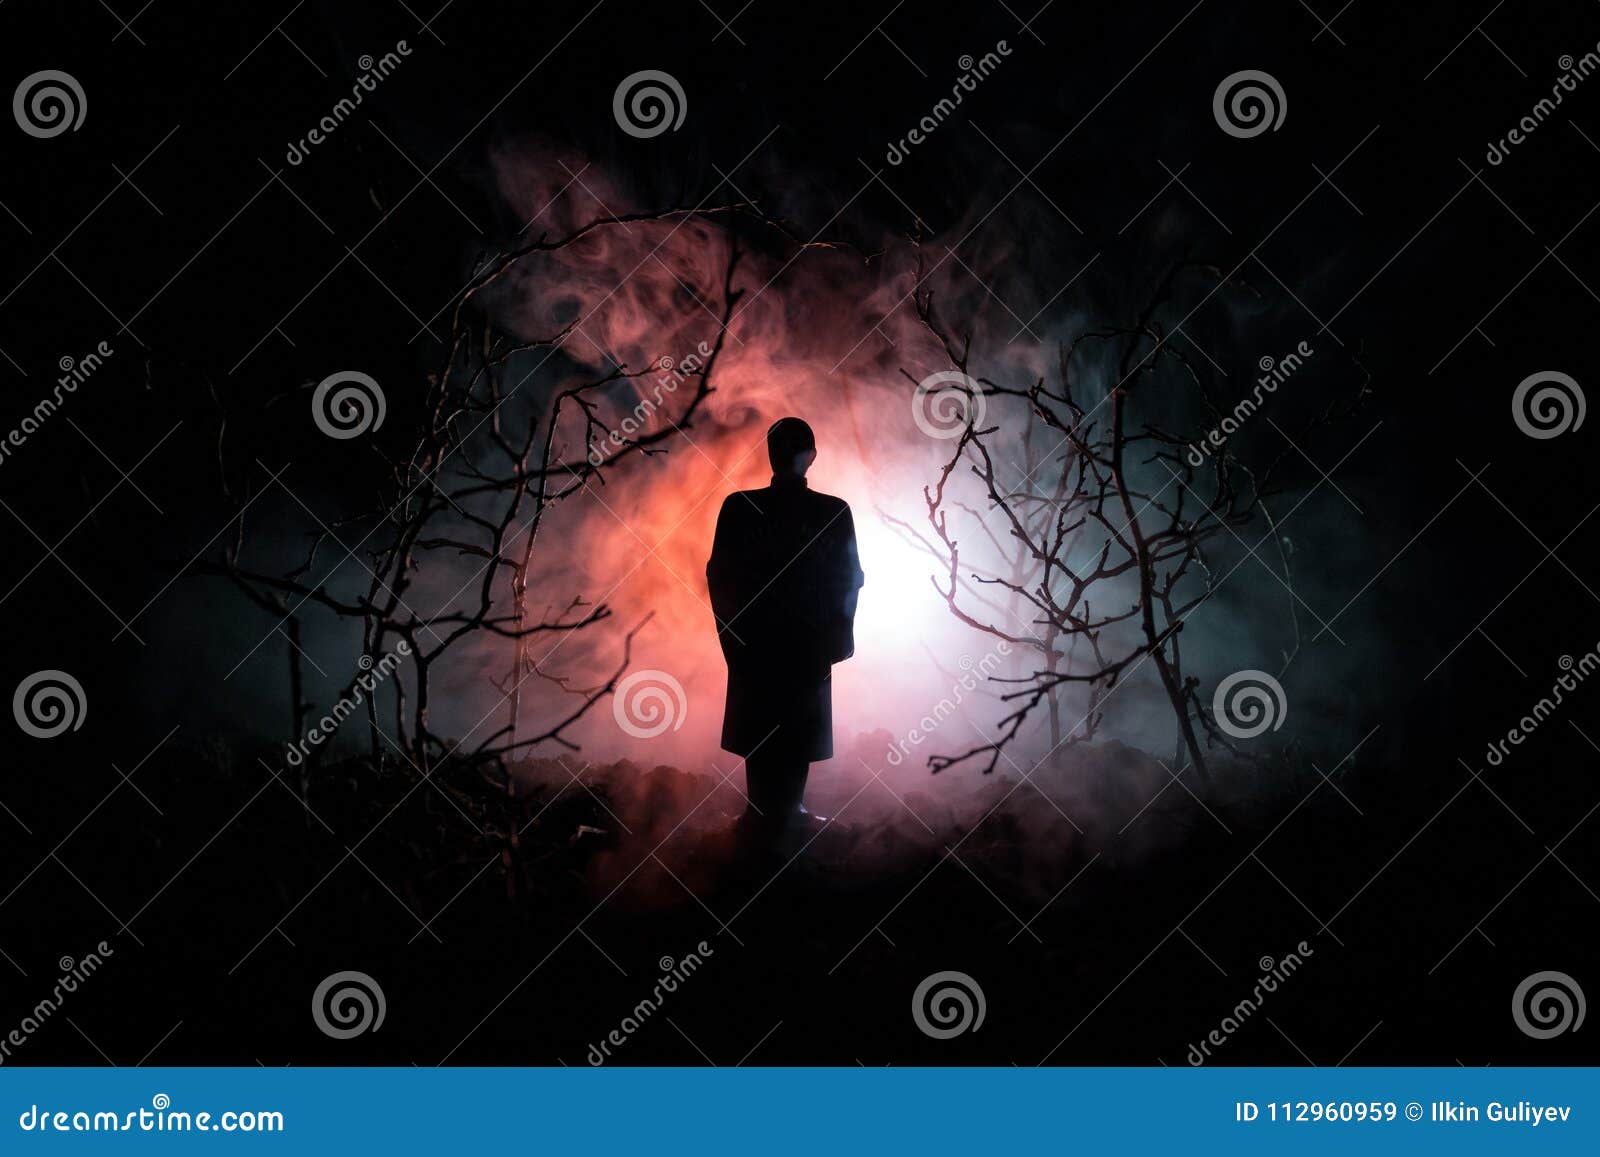 strange silhouette in a dark spooky forest at night, mystical landscape surreal lights with creepy man. toned